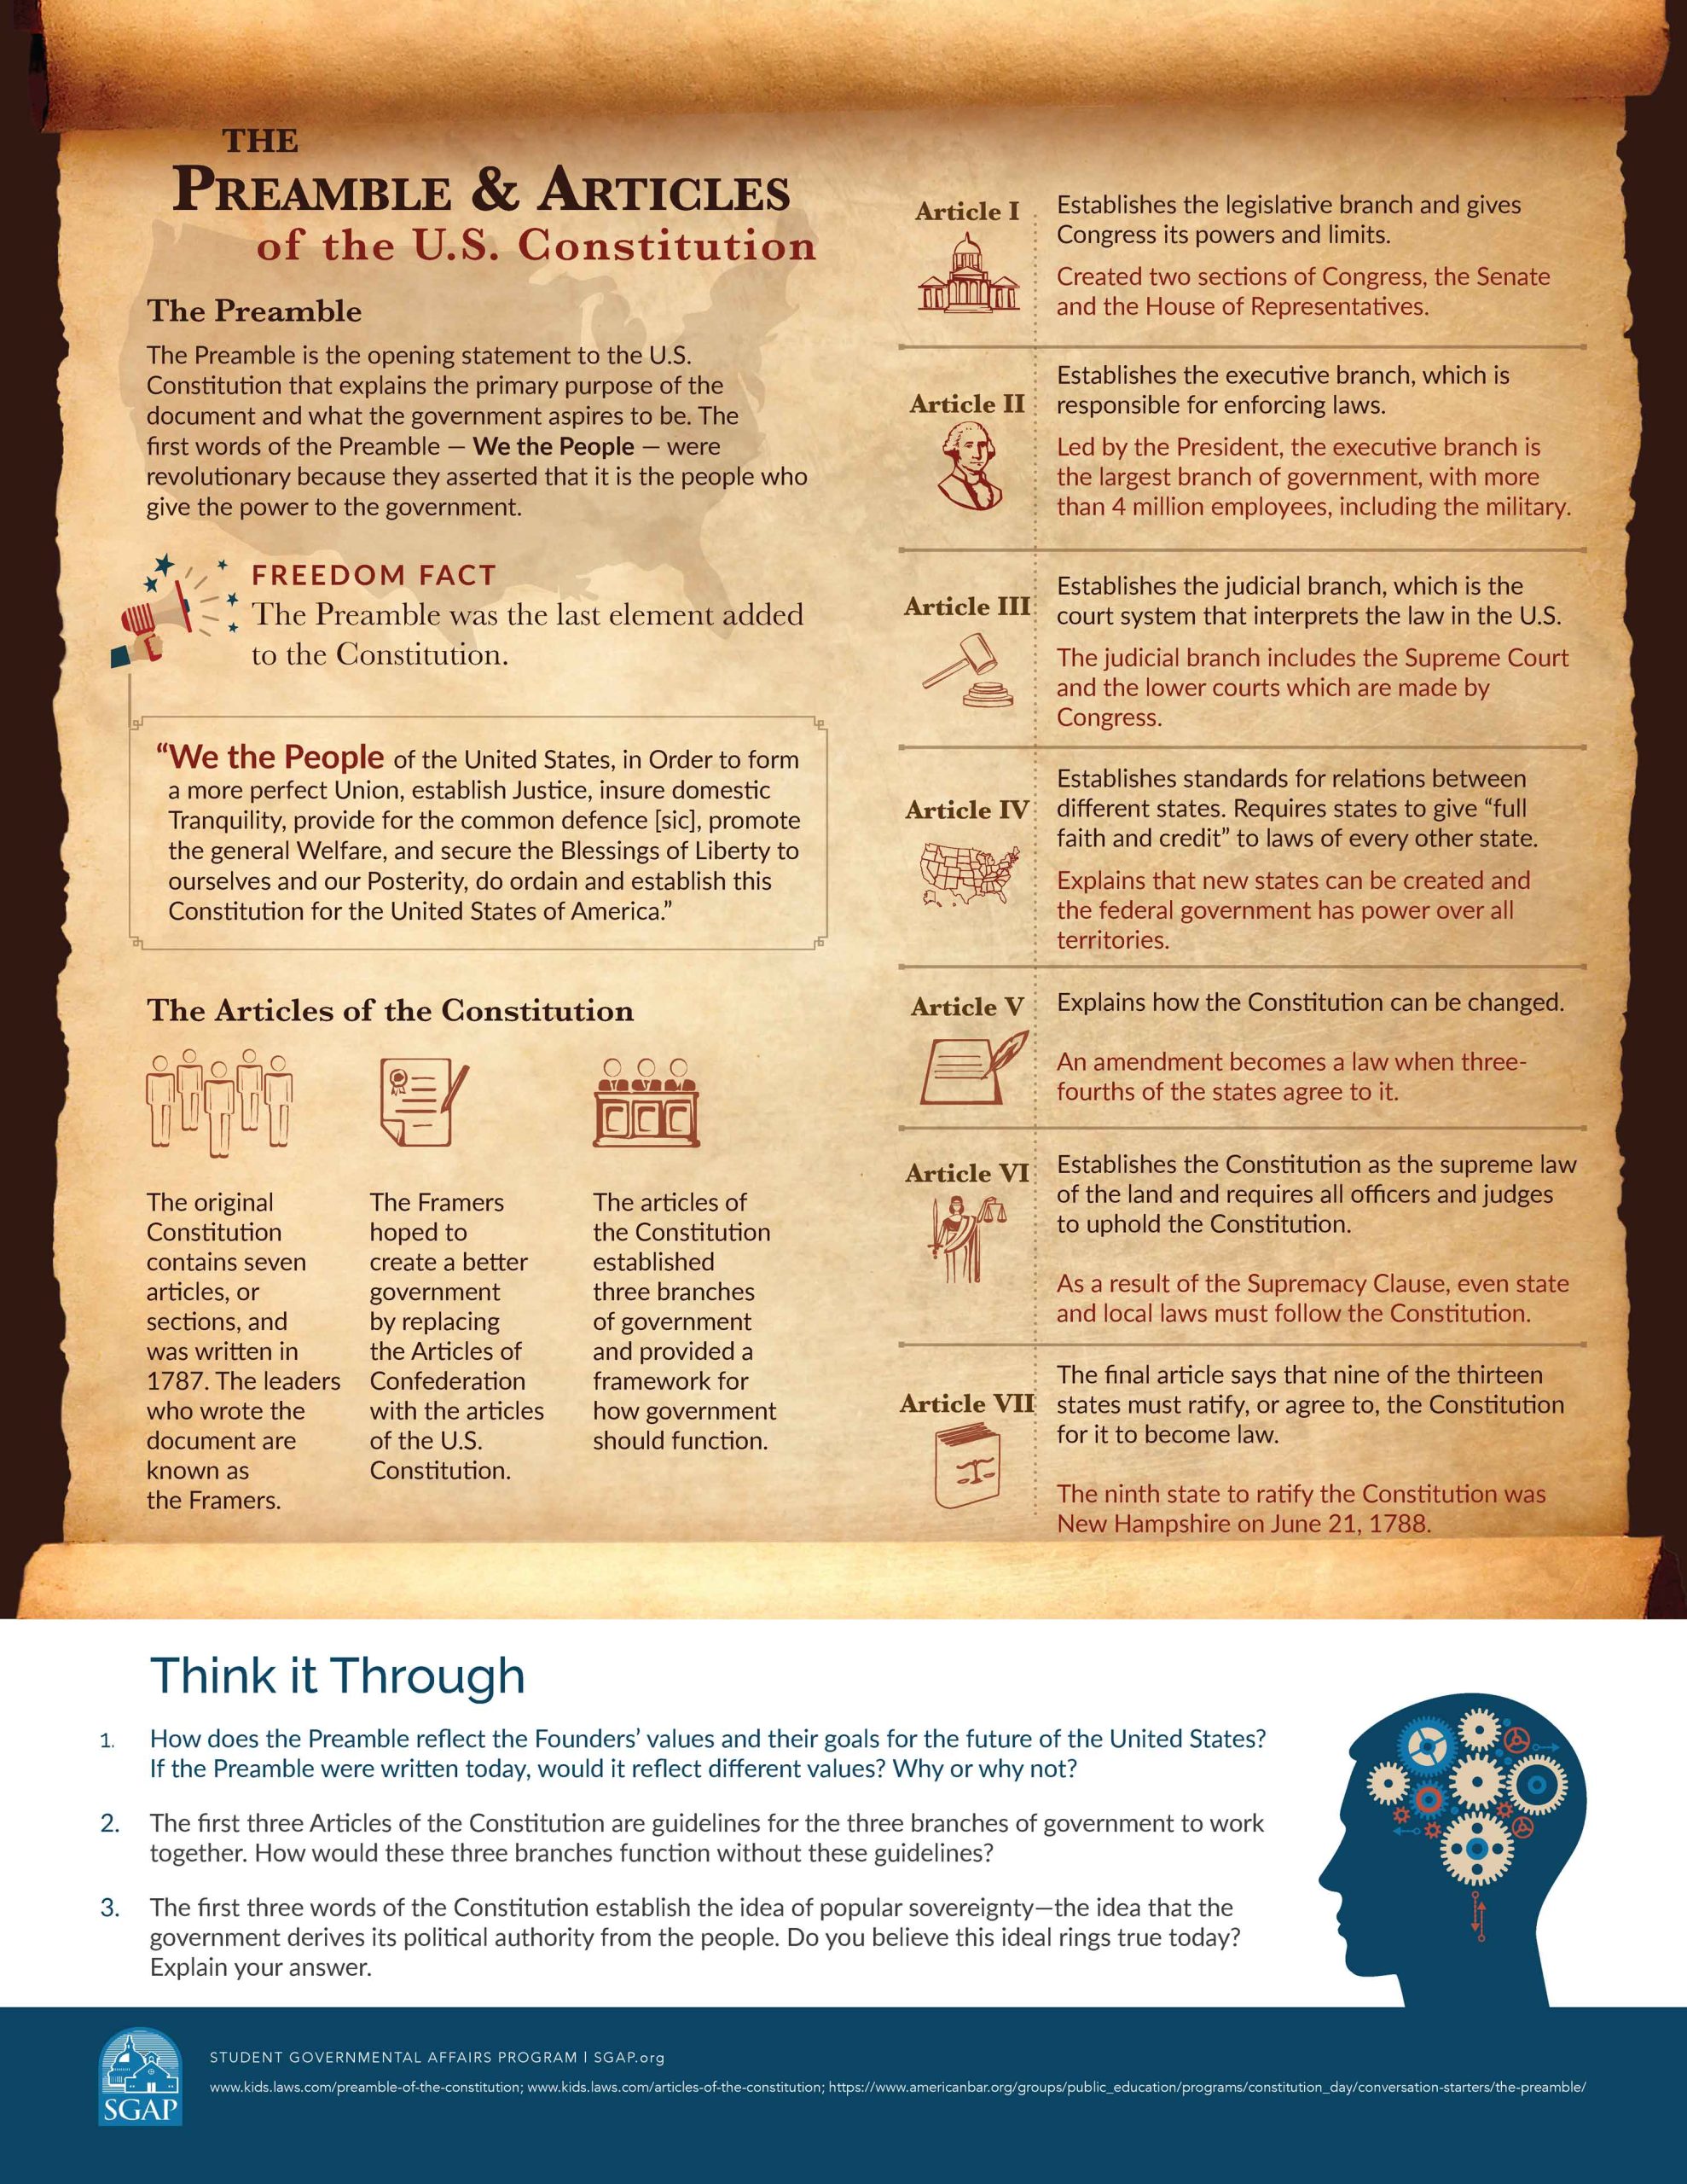 Preamble & Articles of the U.S. Constitution Infographic 2023